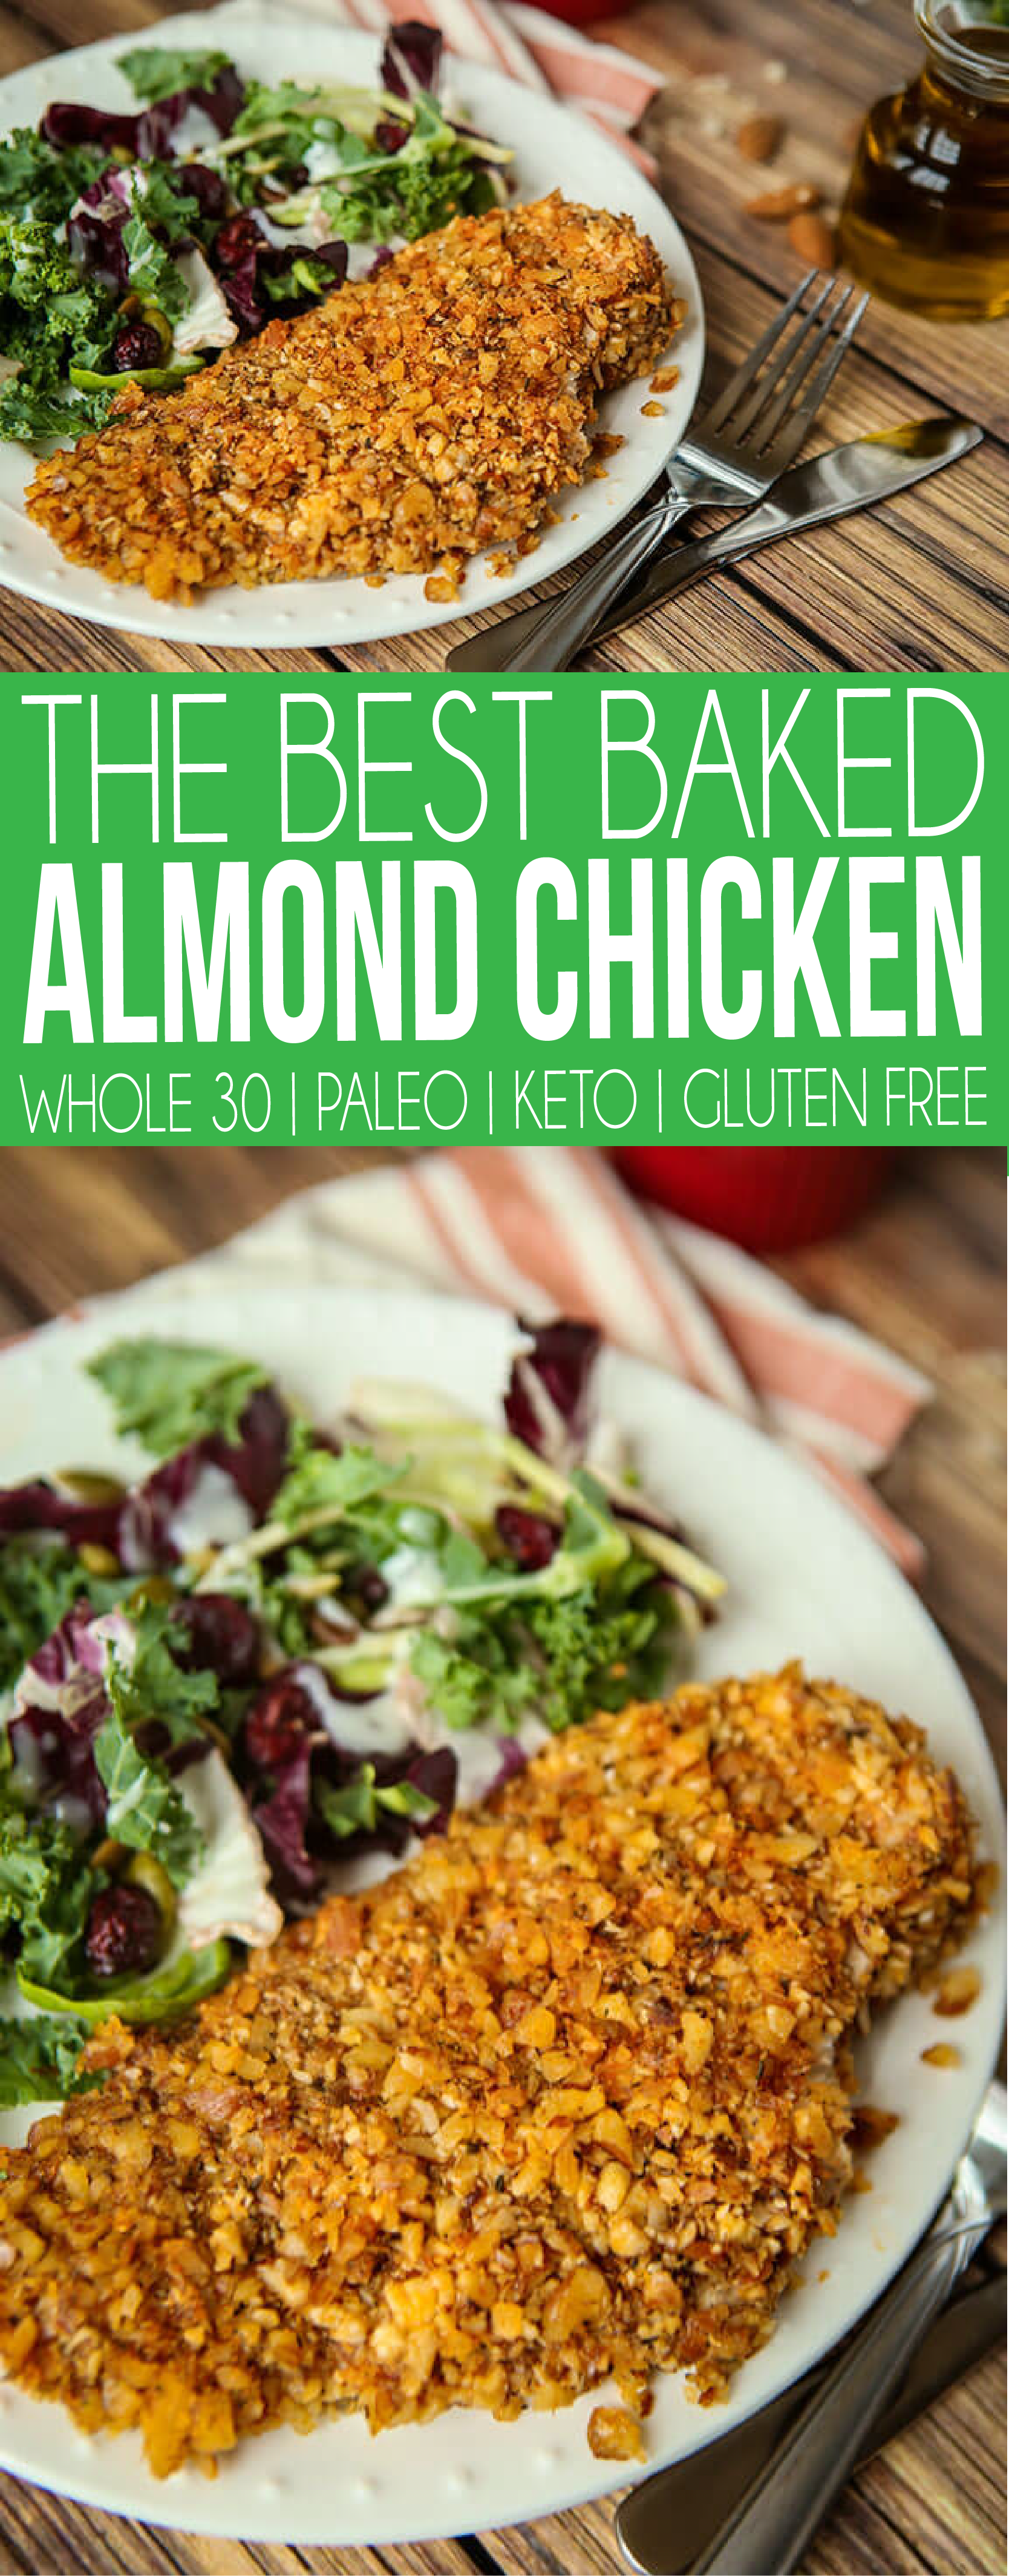 One of the best paleo almond chicken recipes ever! This Whole 30 almond chicken is easy to make, baked, healthy, and perfect with a salad! Or if you want - slice it up and make almond chicken tenders instead. Even works for a Keto diet! 